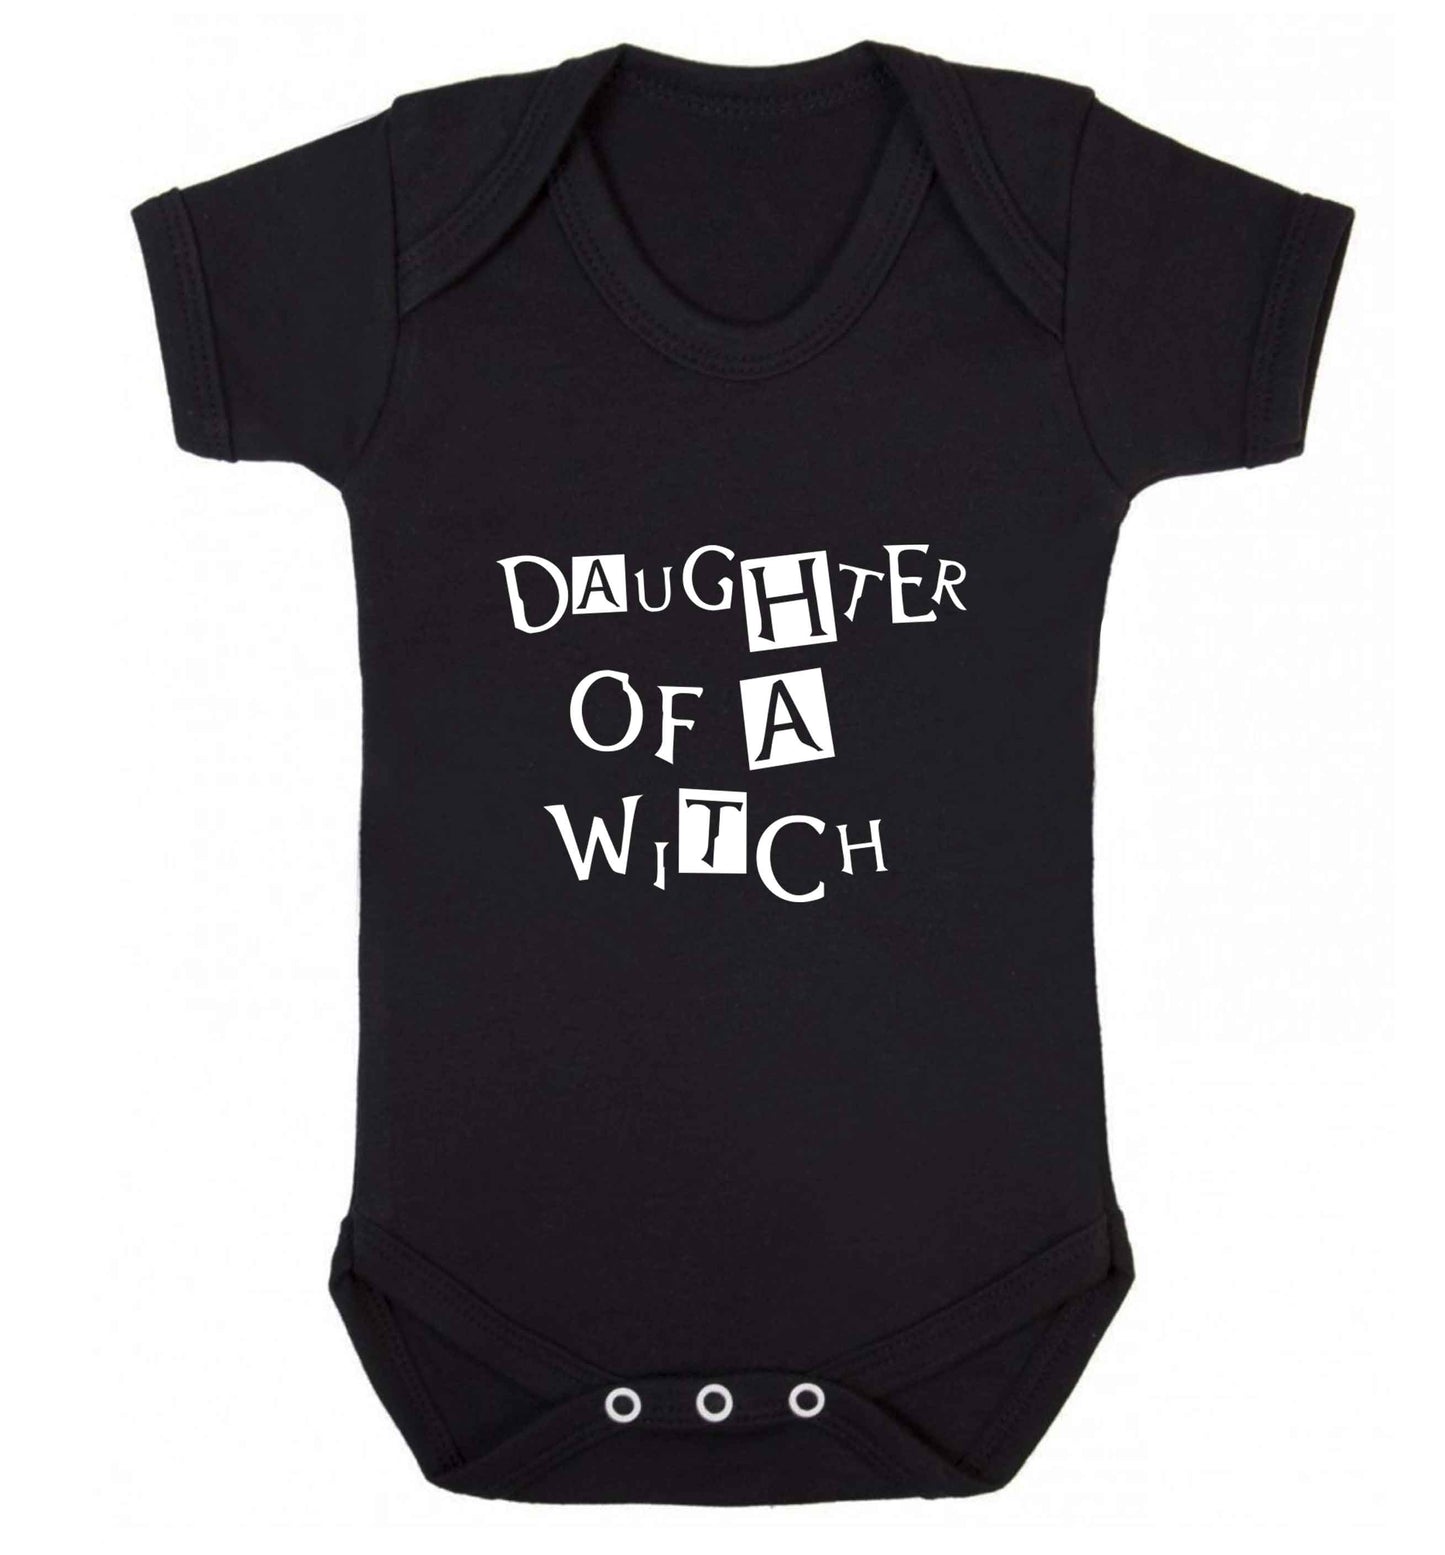 Daughter of a witch baby vest black 18-24 months